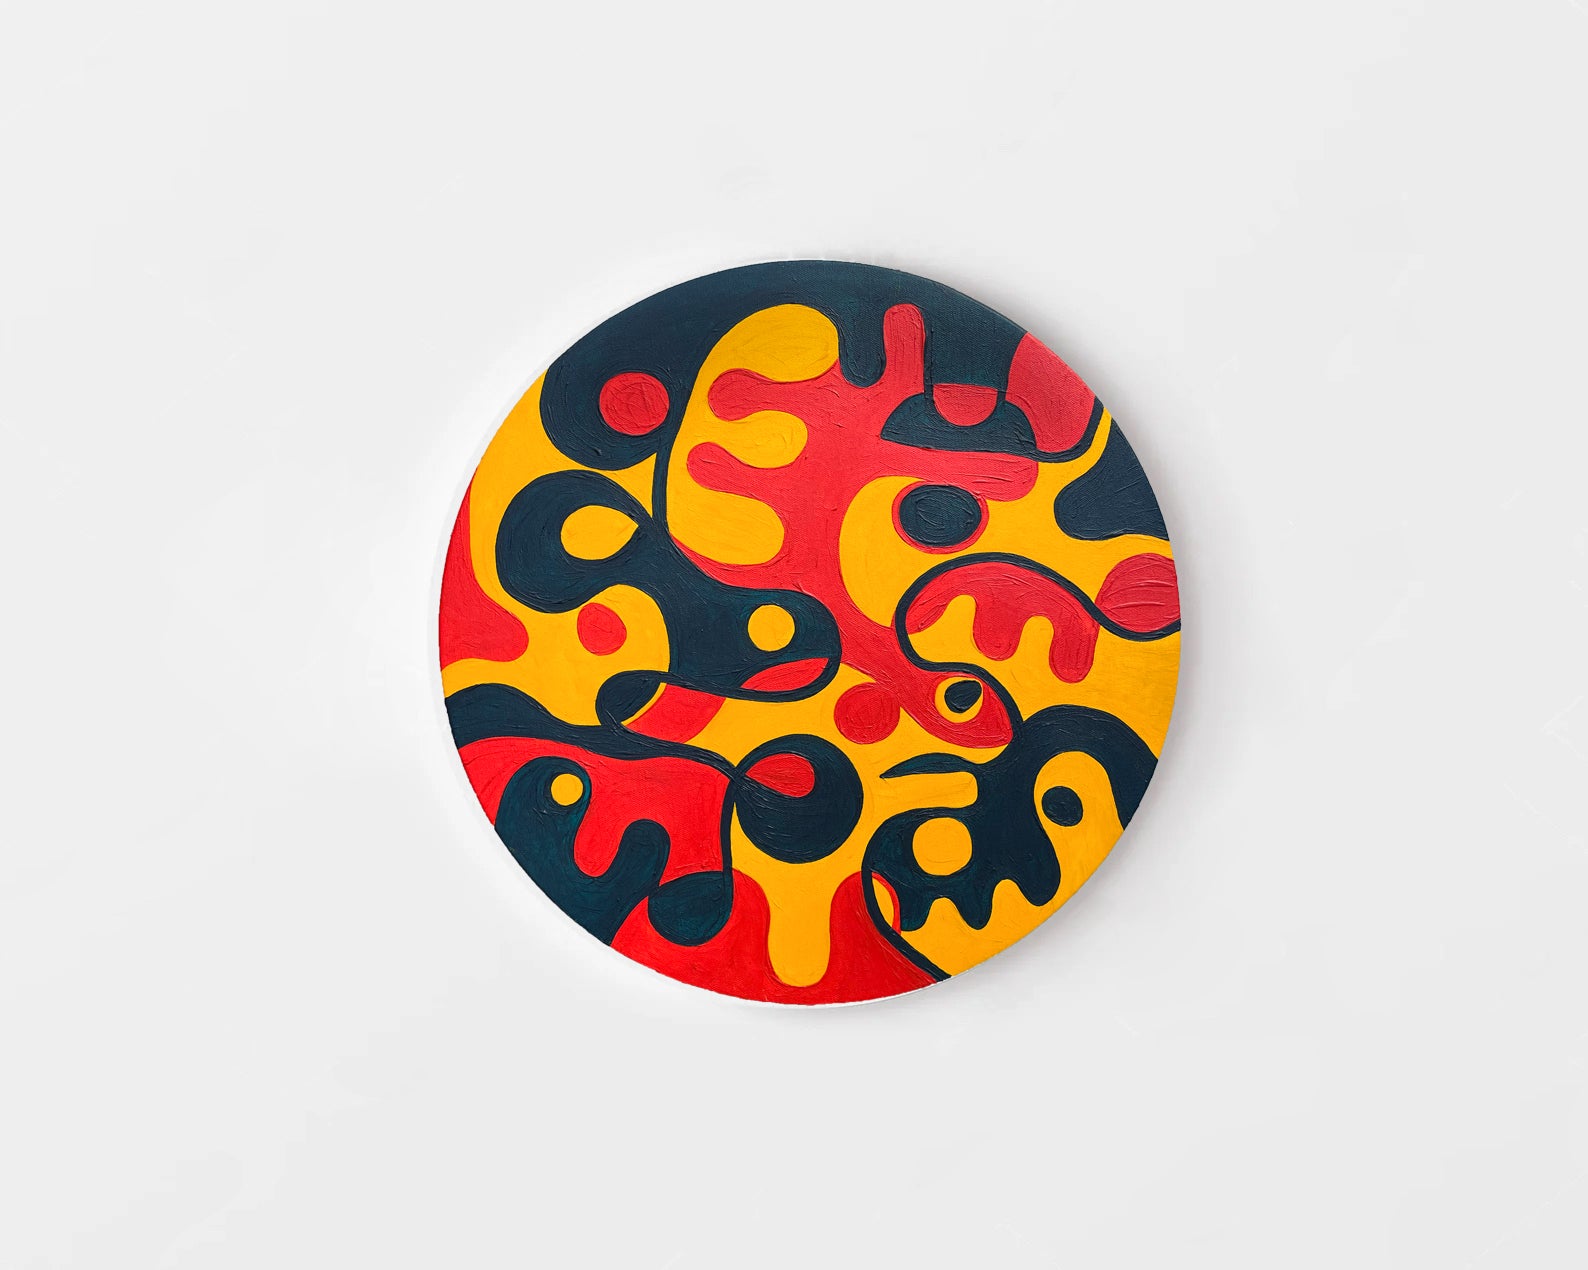 Round Canvas Painting